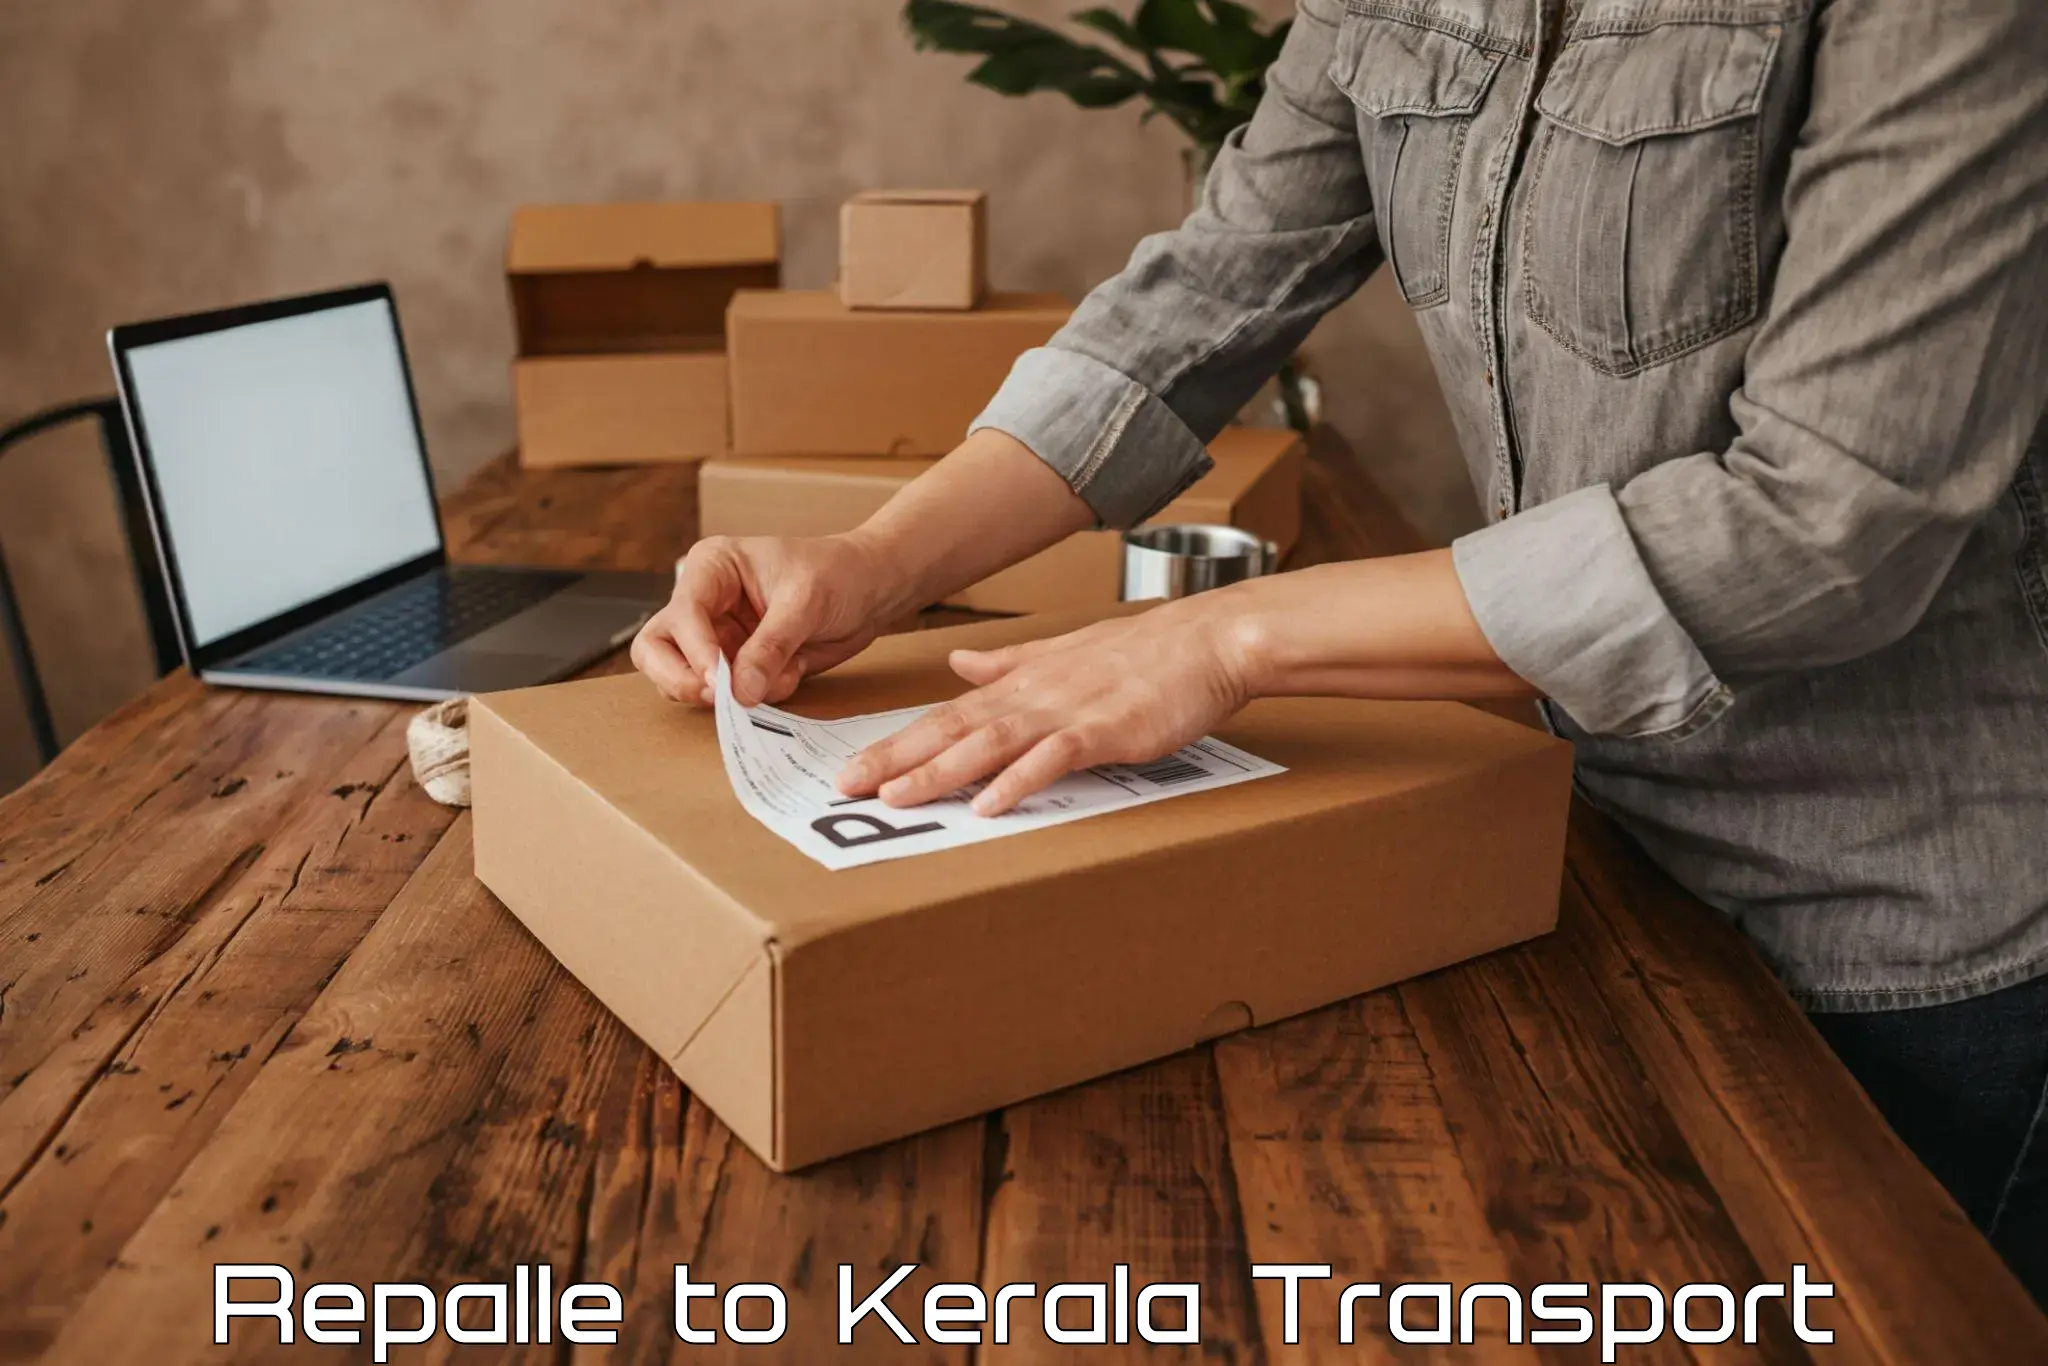 Container transport service Repalle to Kerala